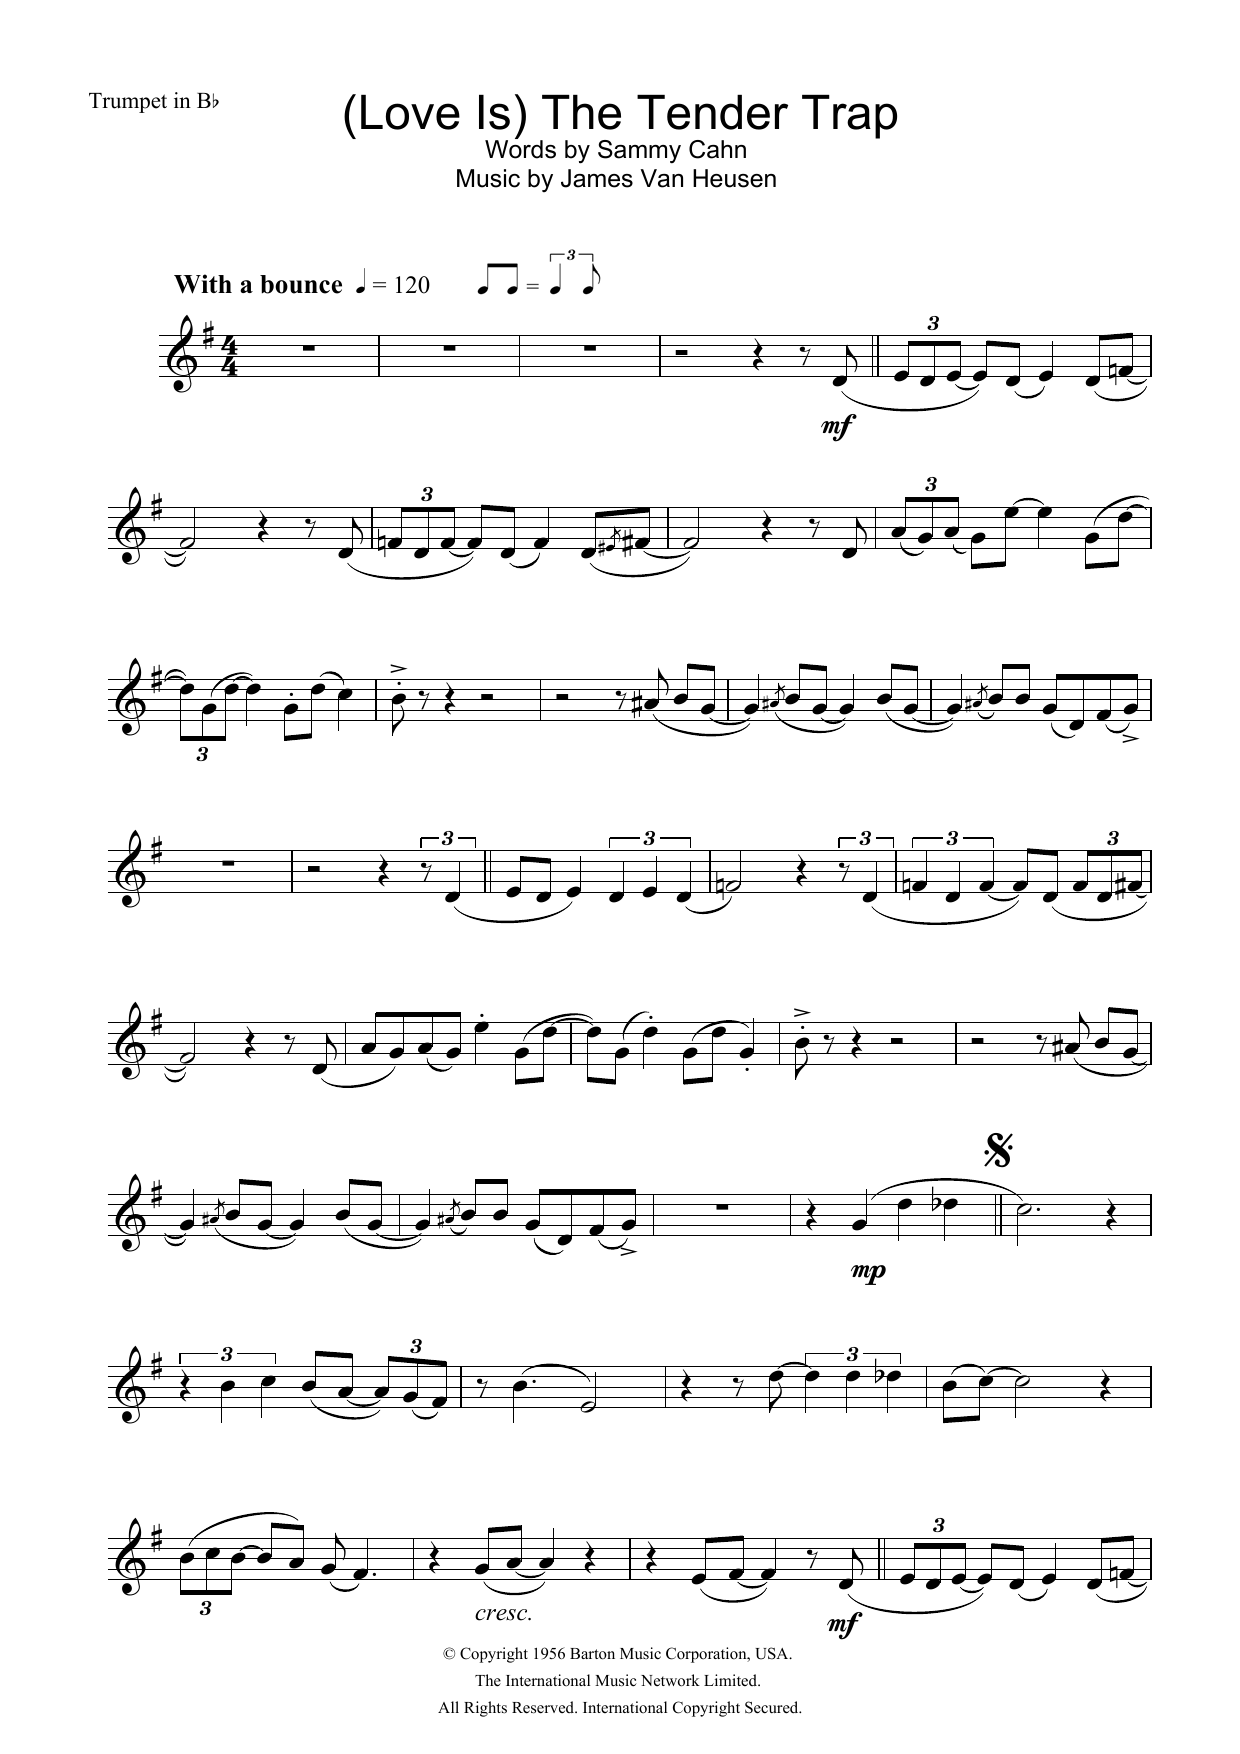 Frank Sinatra (Love Is) The Tender Trap sheet music preview music notes and score for Guitar Tab including 2 page(s)